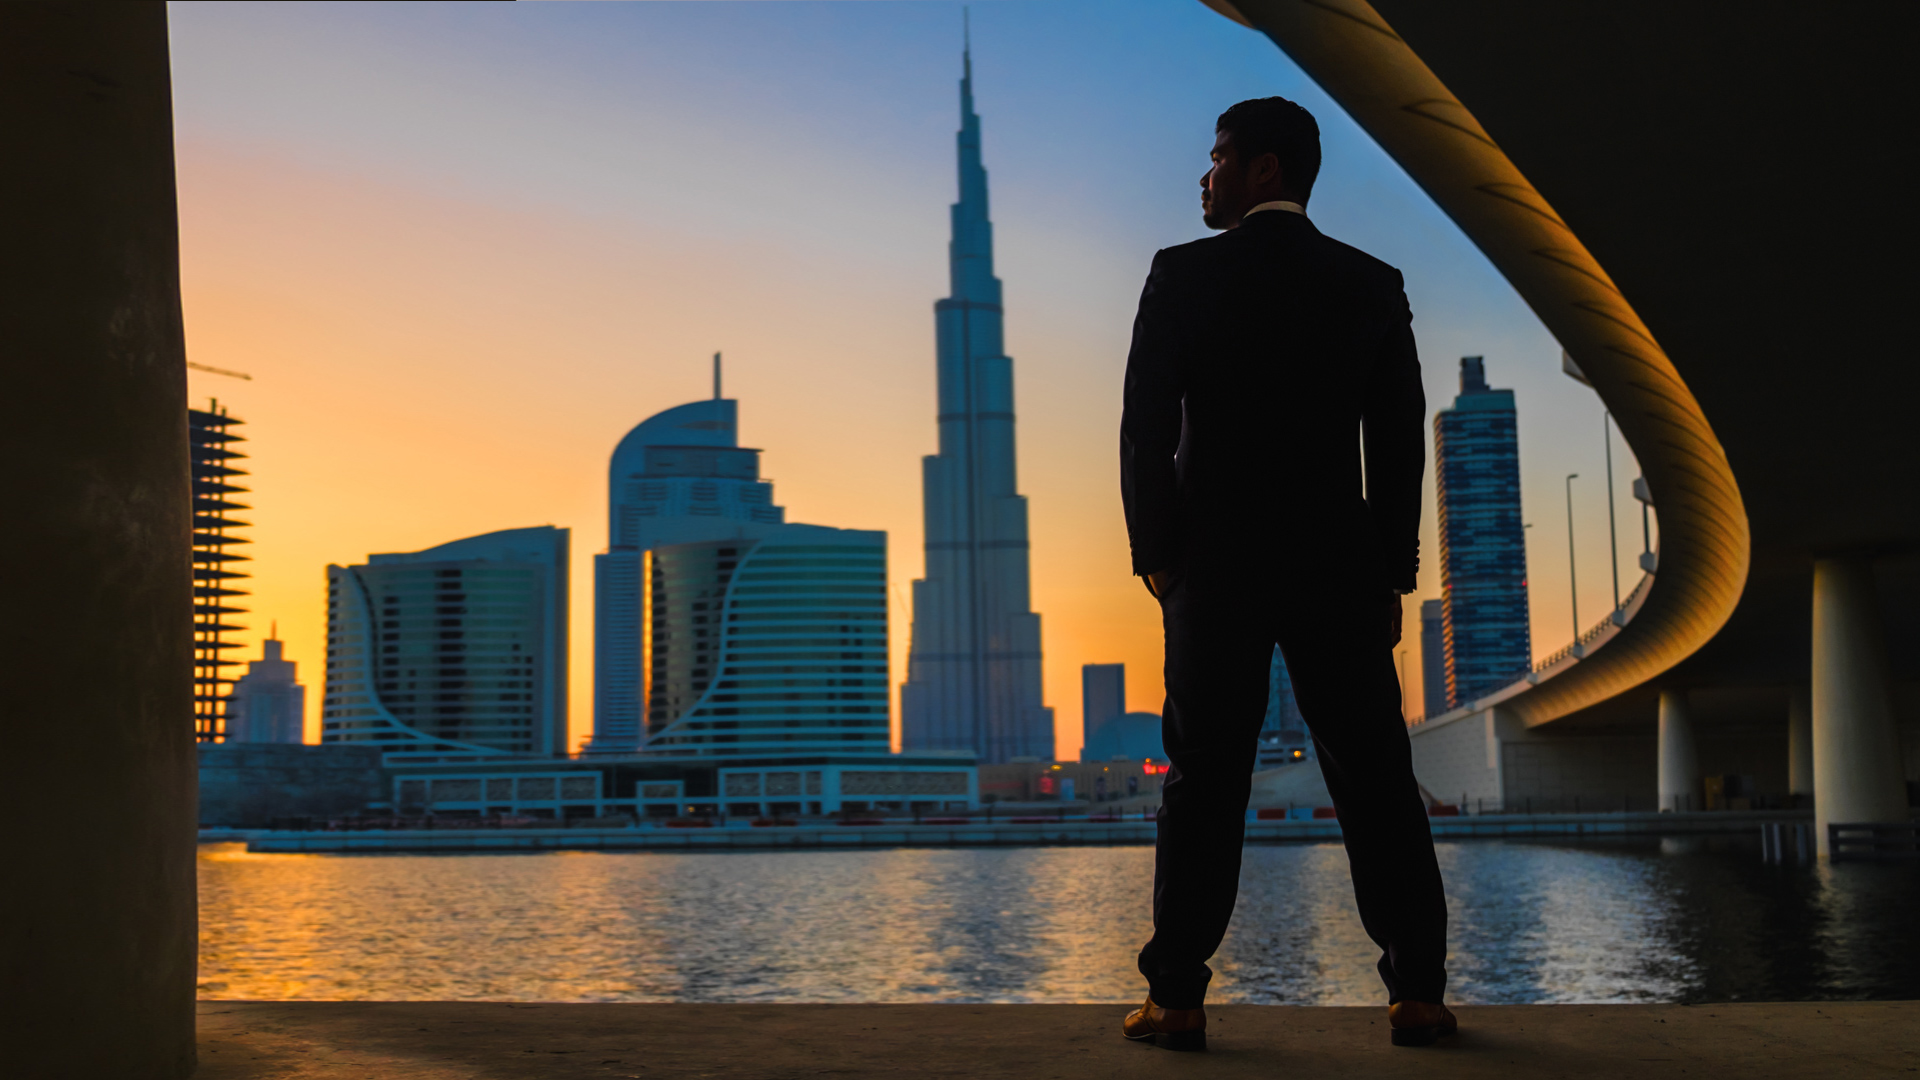 Ceasar silhouetted with Dubai skyline, natural light